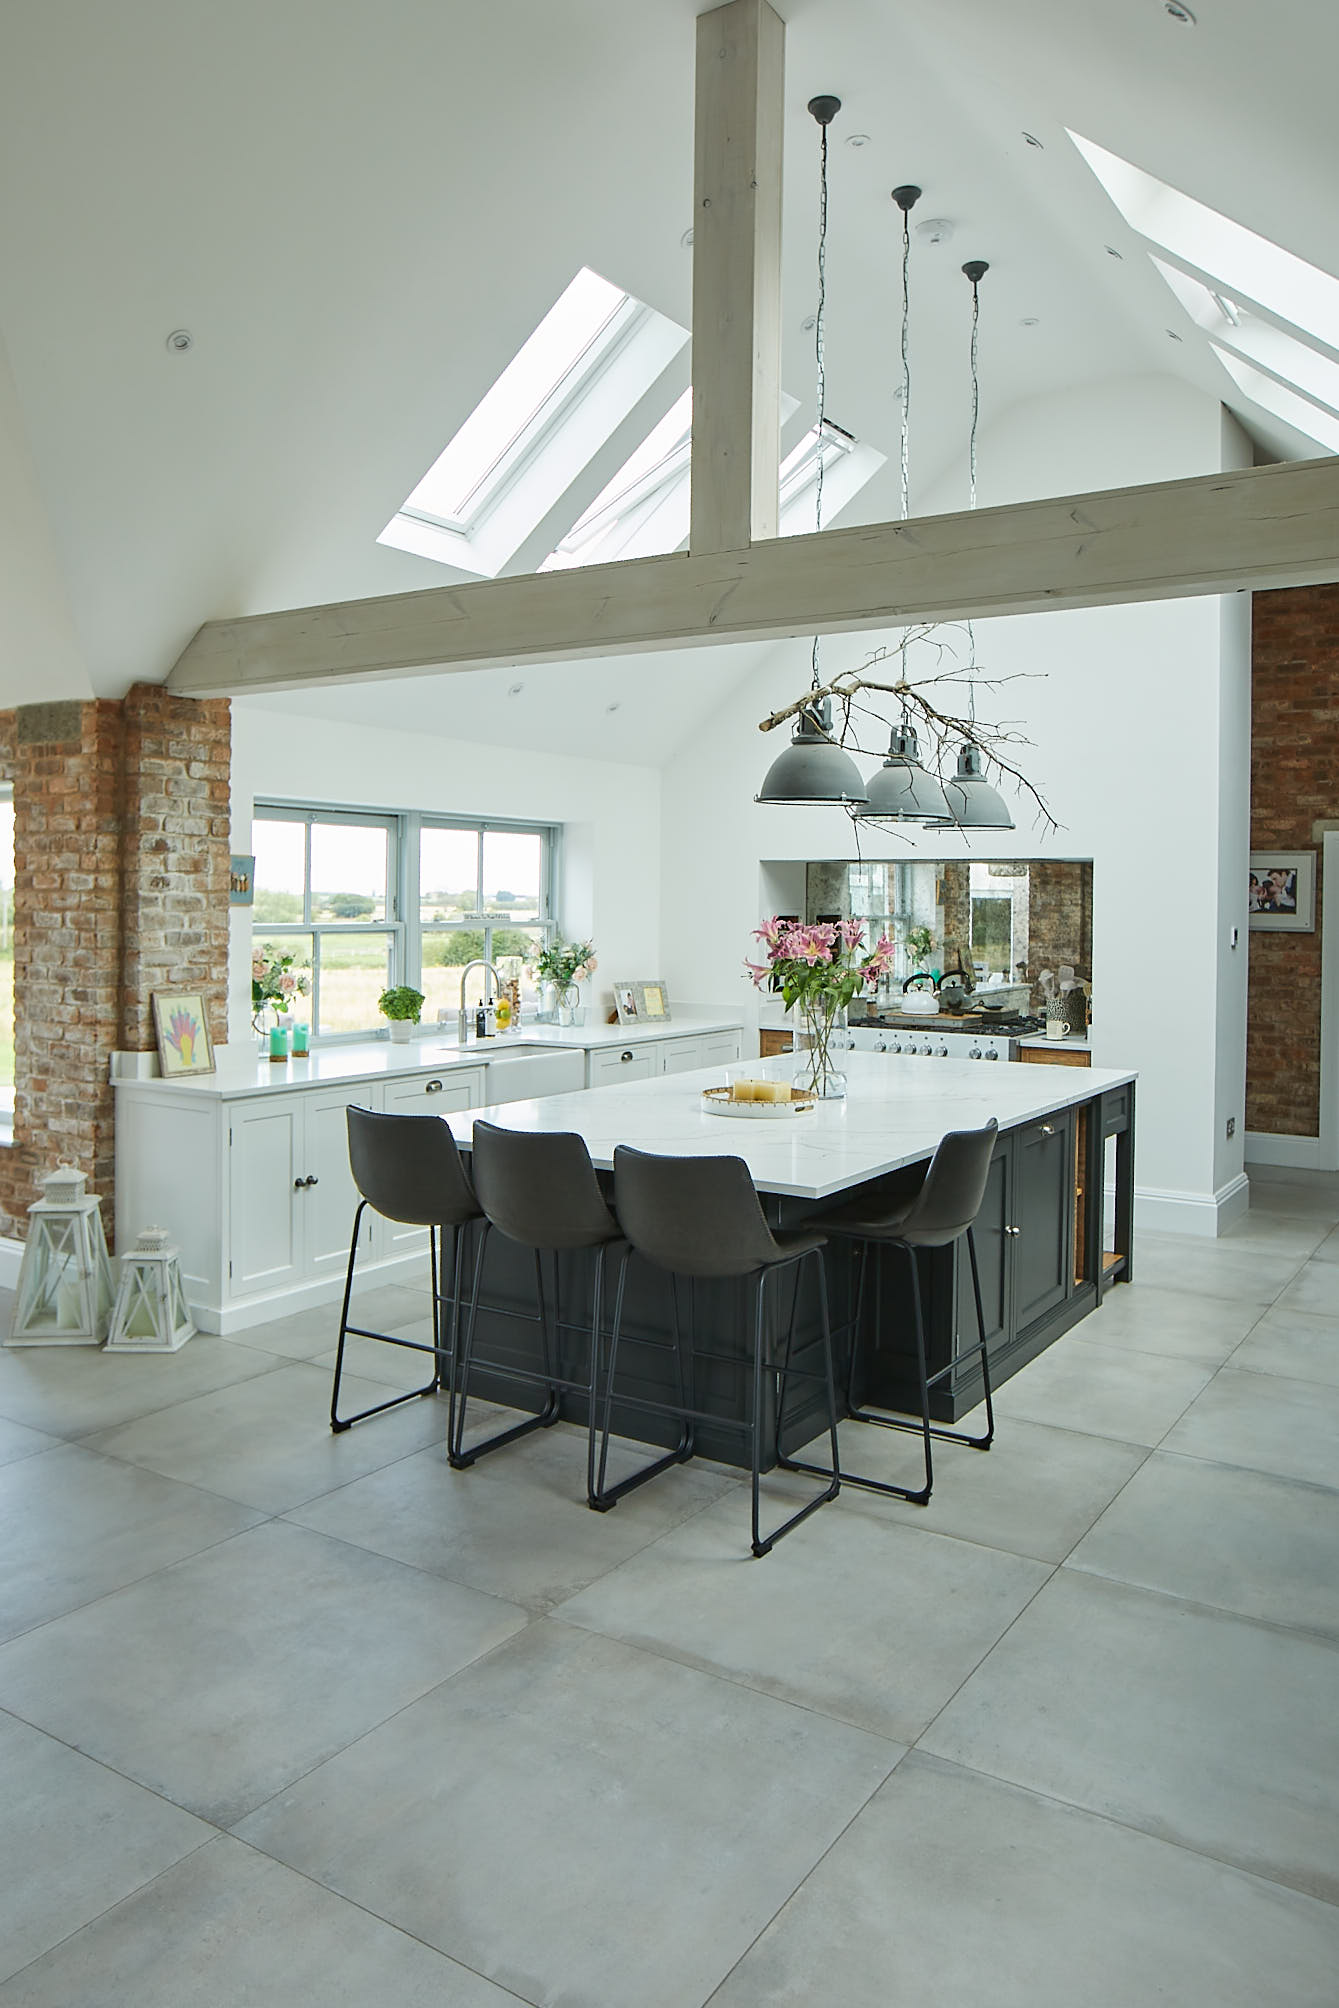 Large vaulted ceiling in open plan kitchen diner with white and black painted cabinets